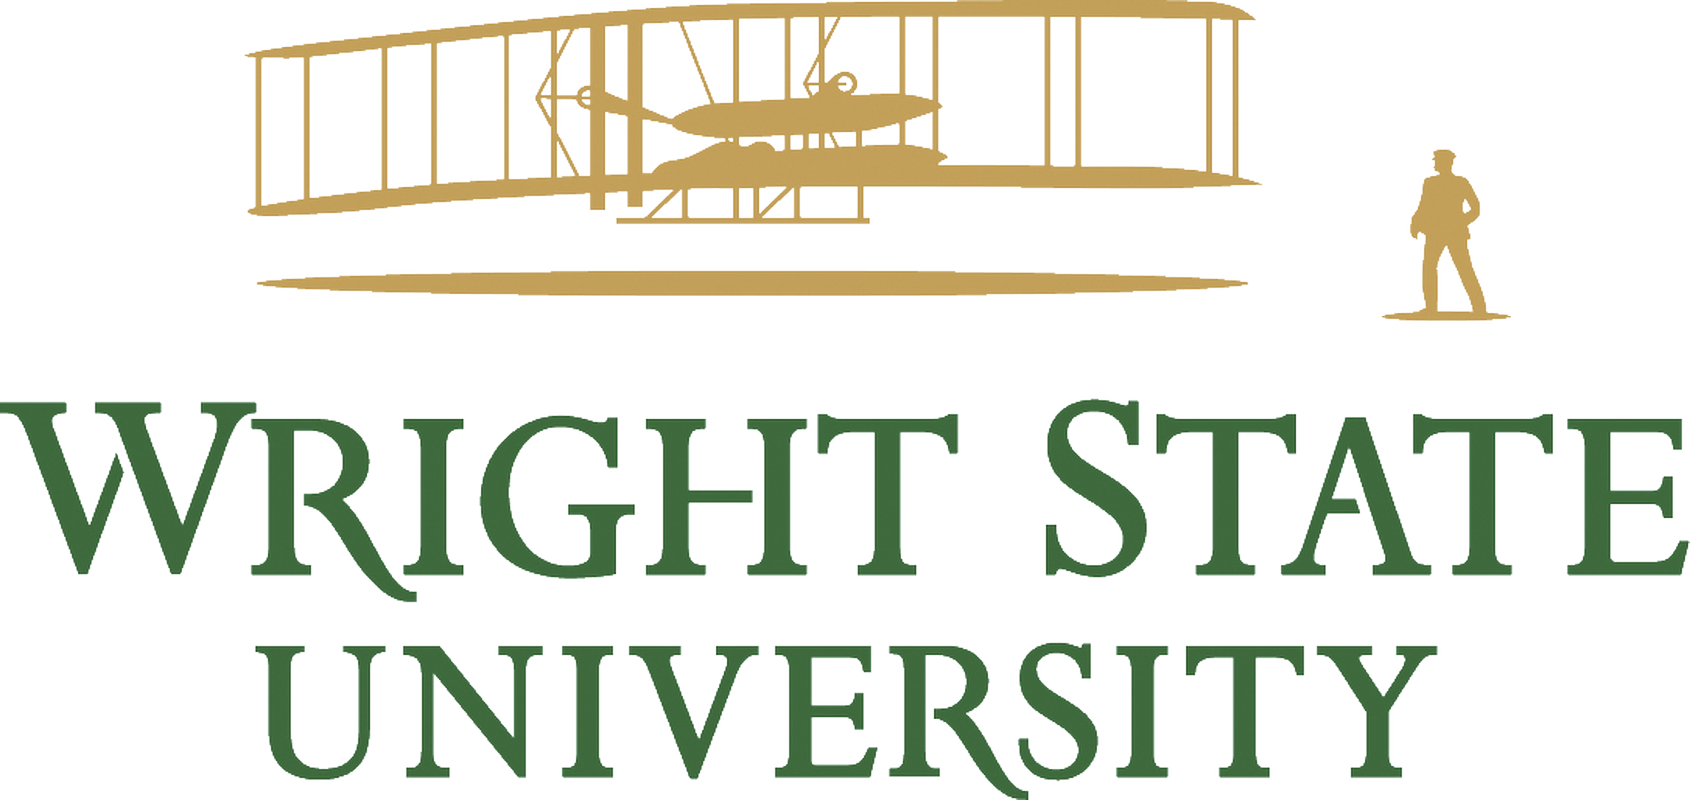 Wright-State-University-12.png